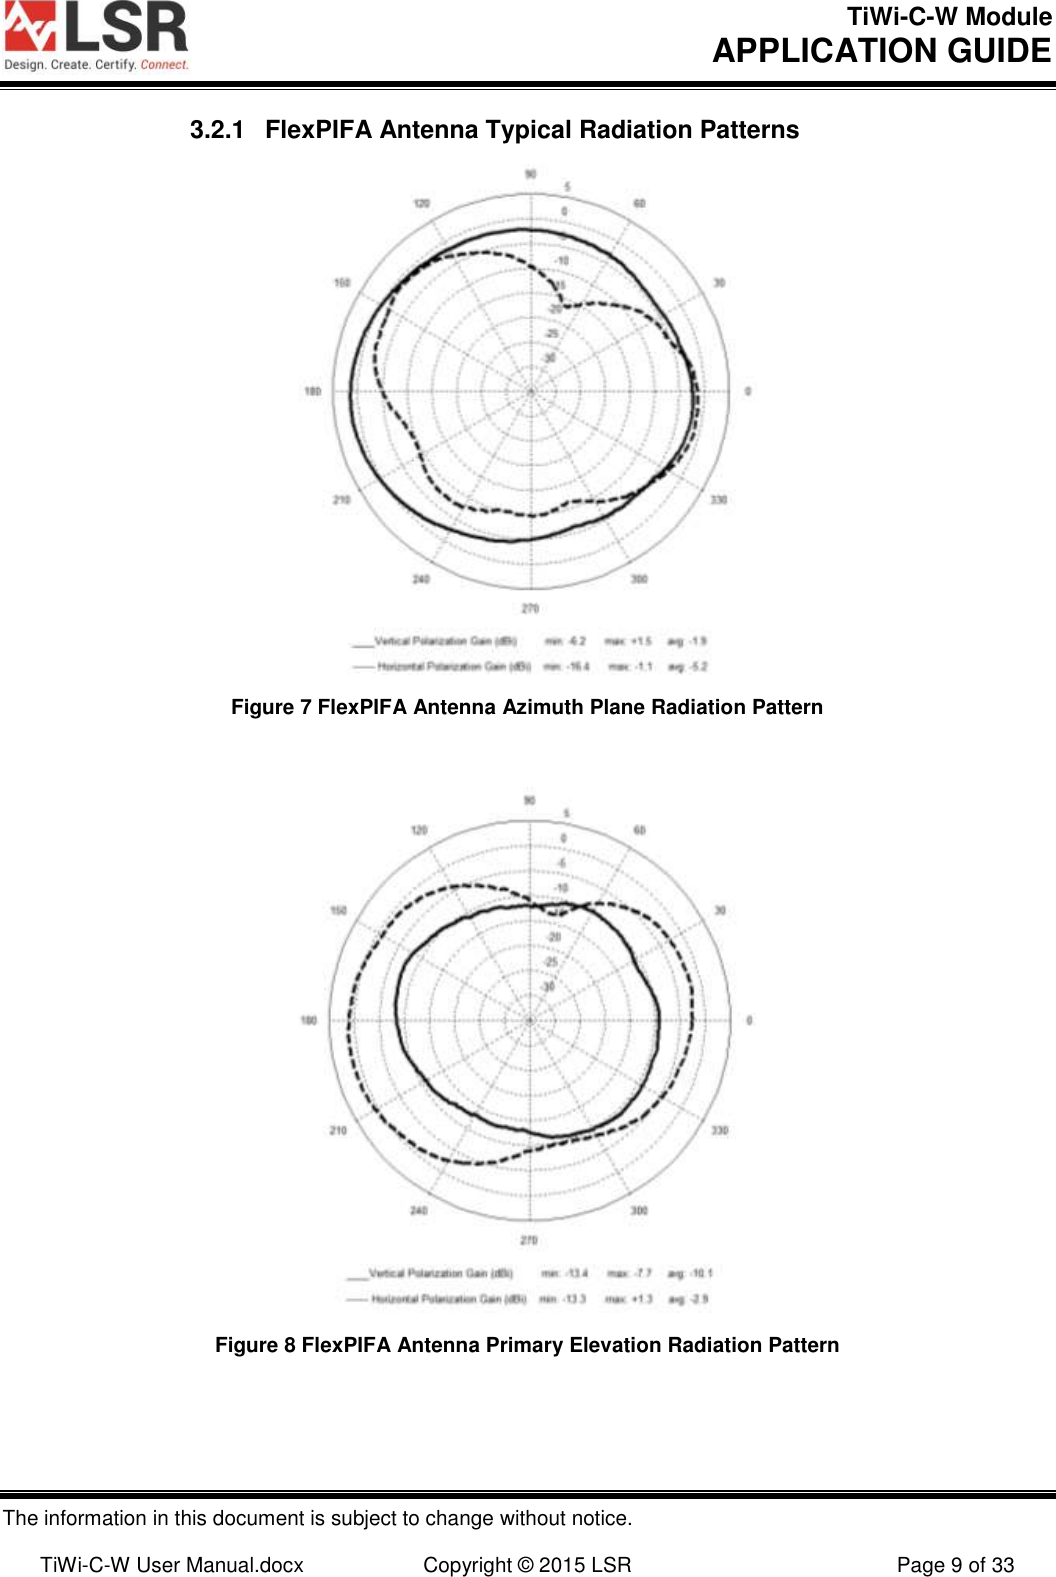 TiWi-C-W Module       APPLICATION GUIDE  The information in this document is subject to change without notice.  TiWi-C-W User Manual.docx  Copyright © 2015 LSR  Page 9 of 33 3.2.1  FlexPIFA Antenna Typical Radiation Patterns  Figure 7 FlexPIFA Antenna Azimuth Plane Radiation Pattern   Figure 8 FlexPIFA Antenna Primary Elevation Radiation Pattern  